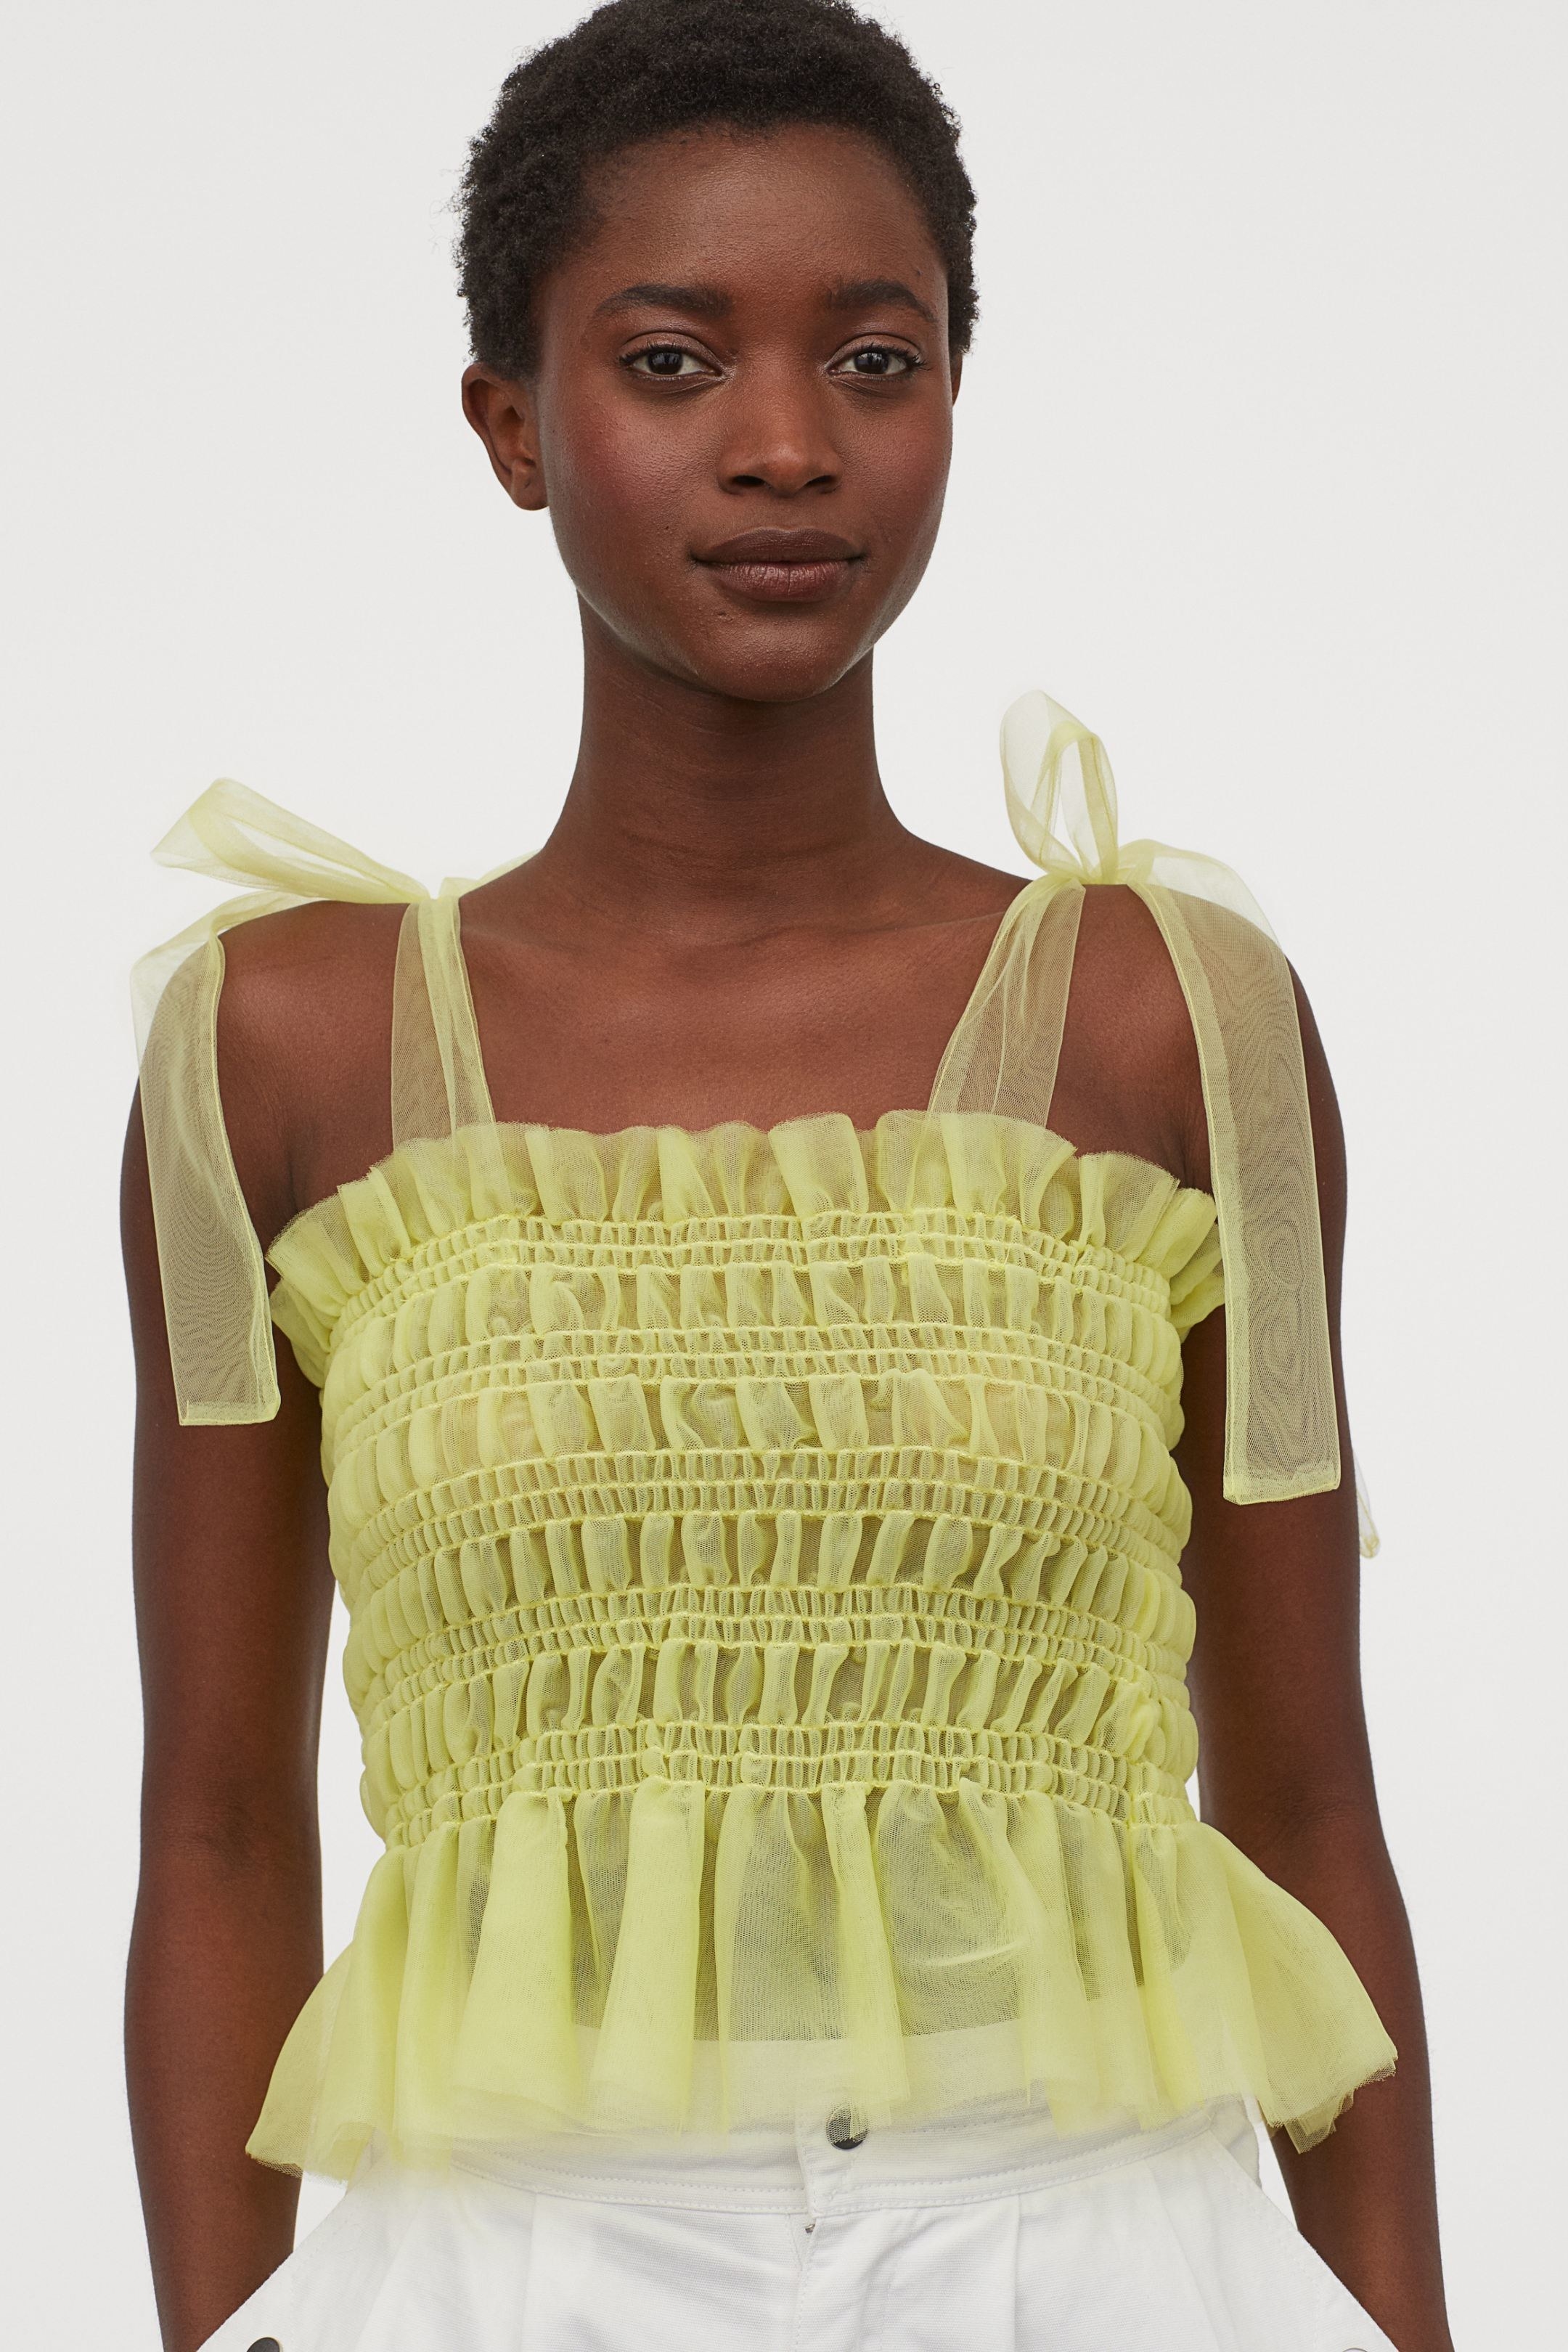 A model wearing the ruched tulle top in light yellow